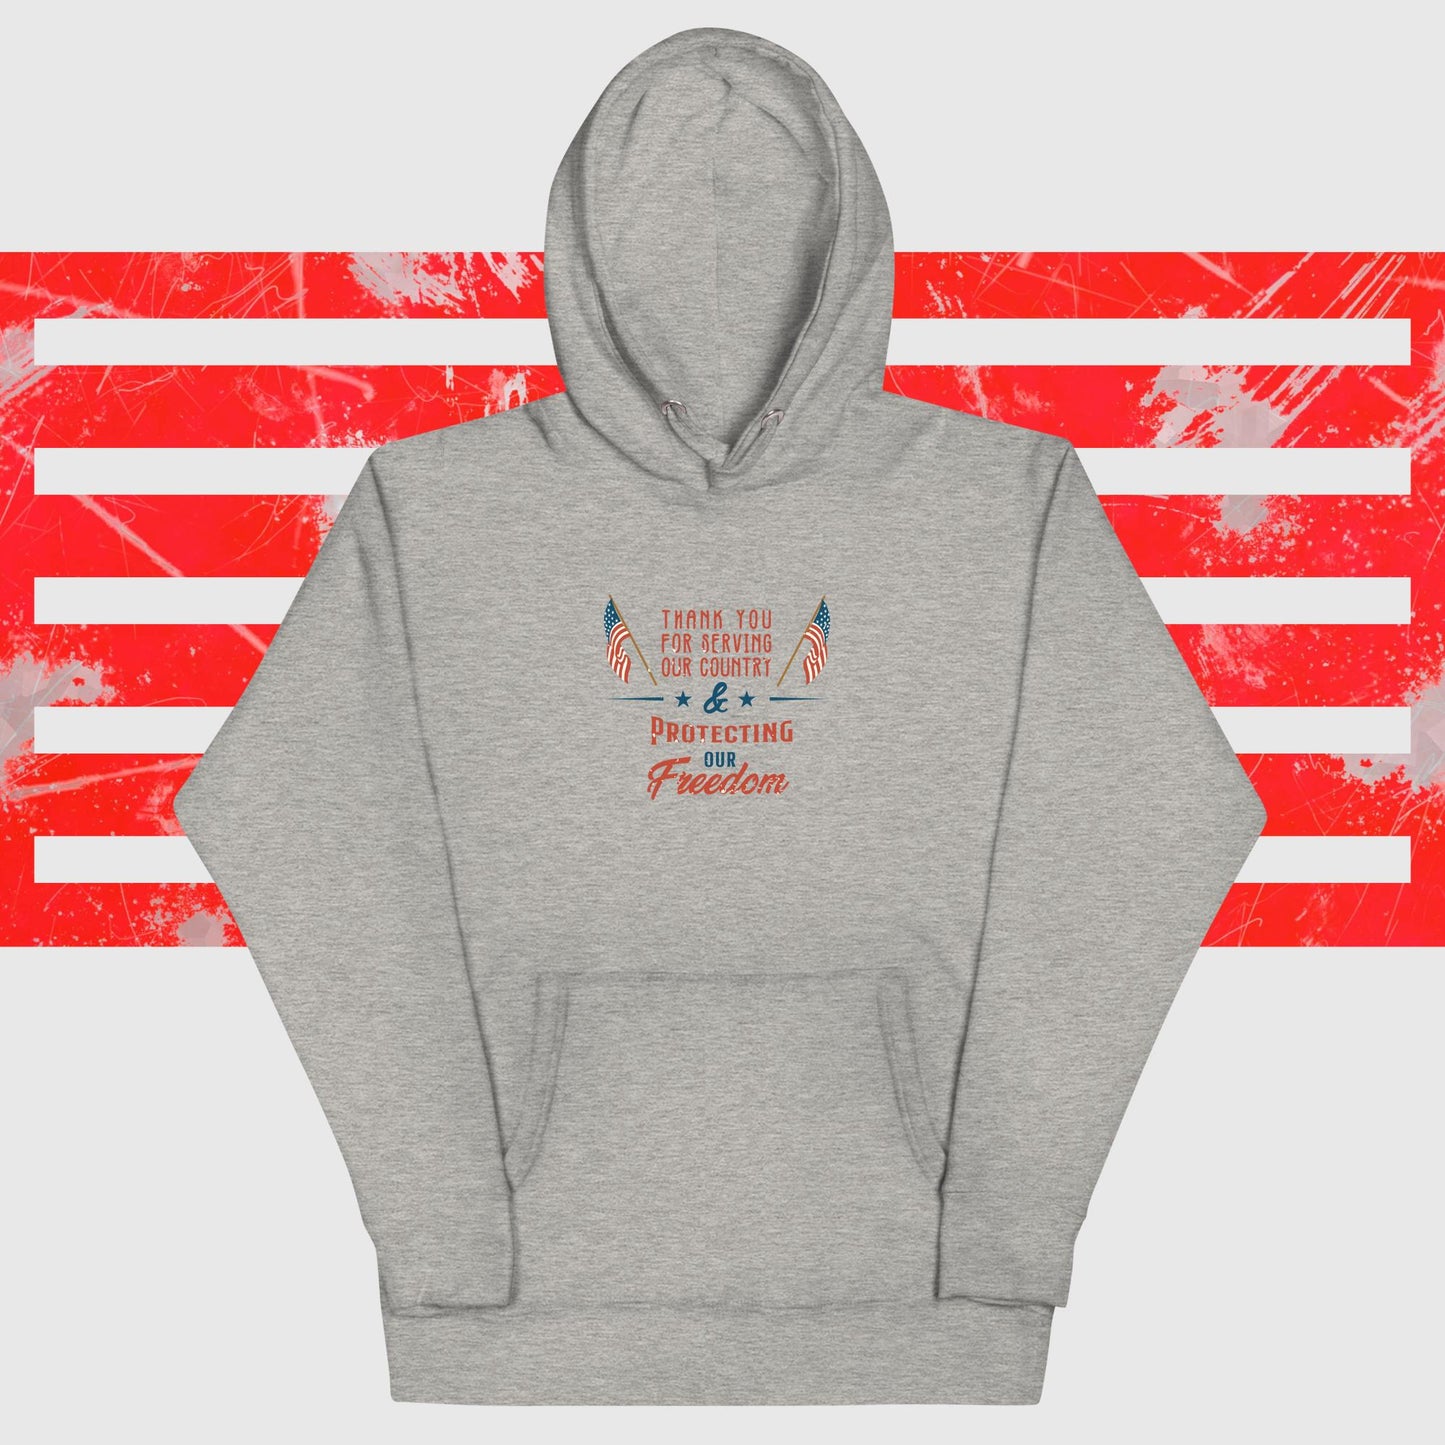 PATRIOTIC UNISEX HOODIE FOR VETERANS DAY CLASSIC GREY FRONT - www.firstamericanstore.com